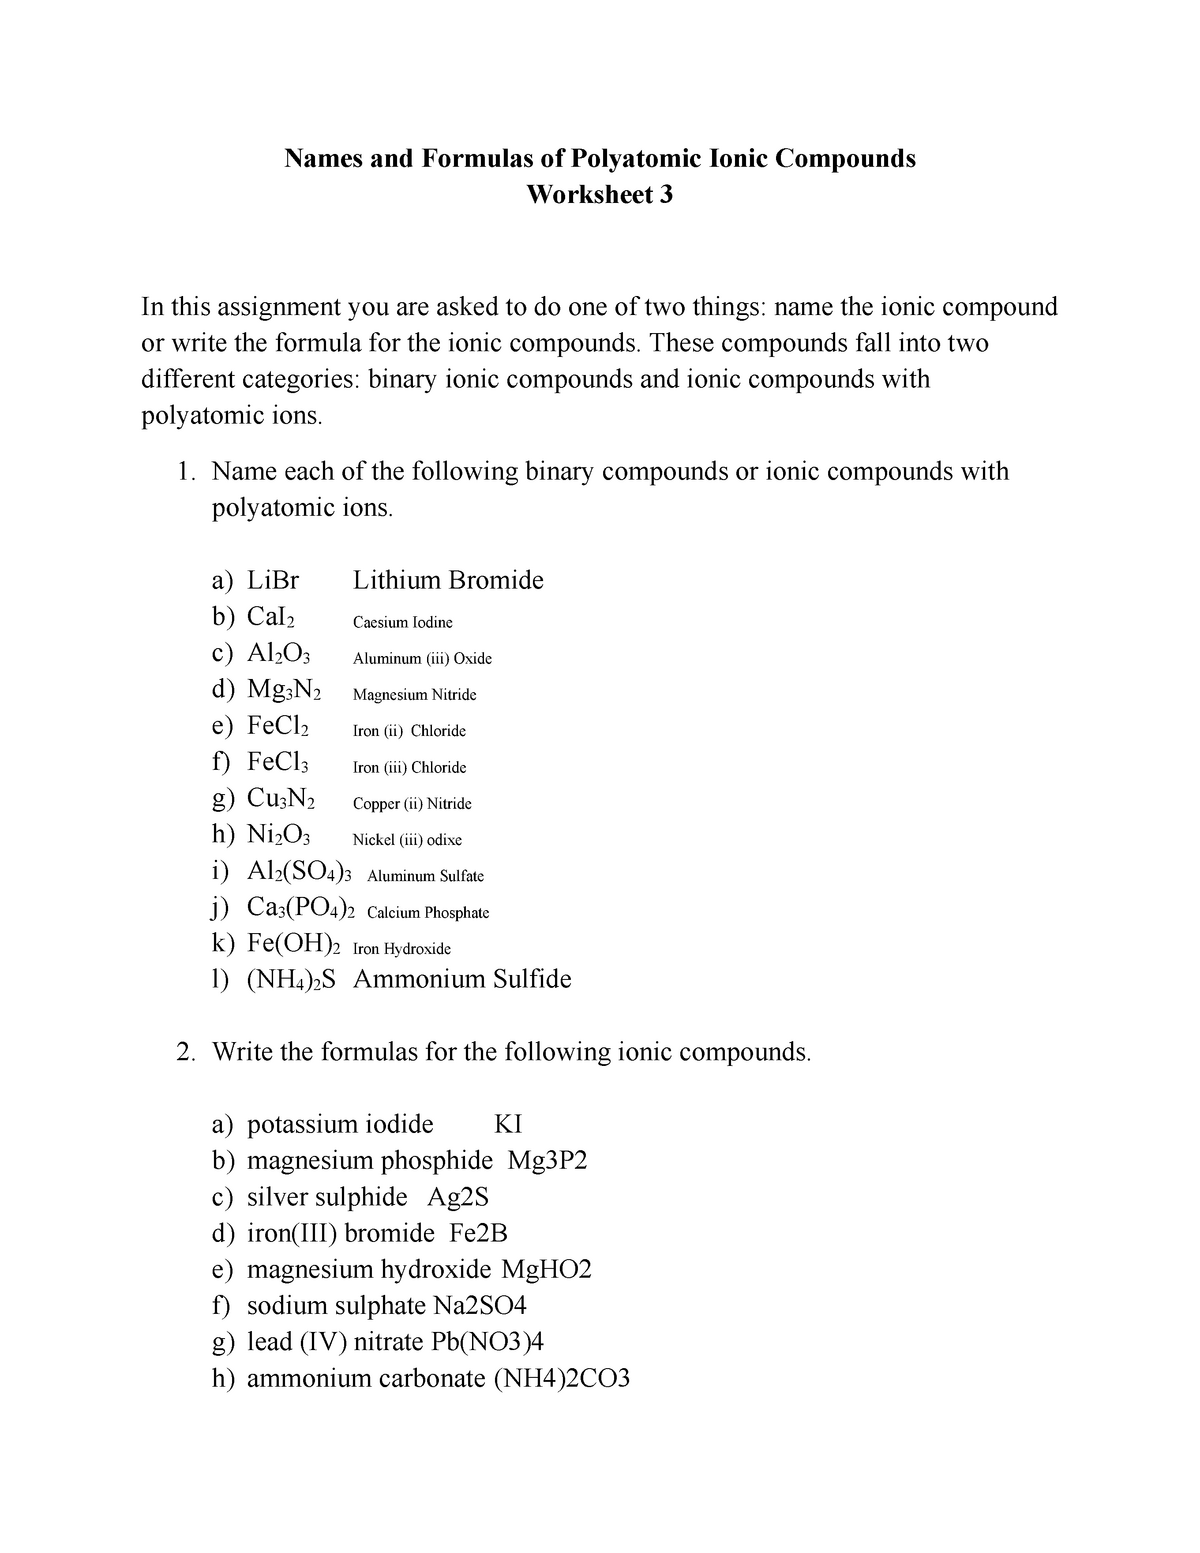 polyatomic-ionic-compounds-worksheet-3-food-and-nutrition-1-uwo